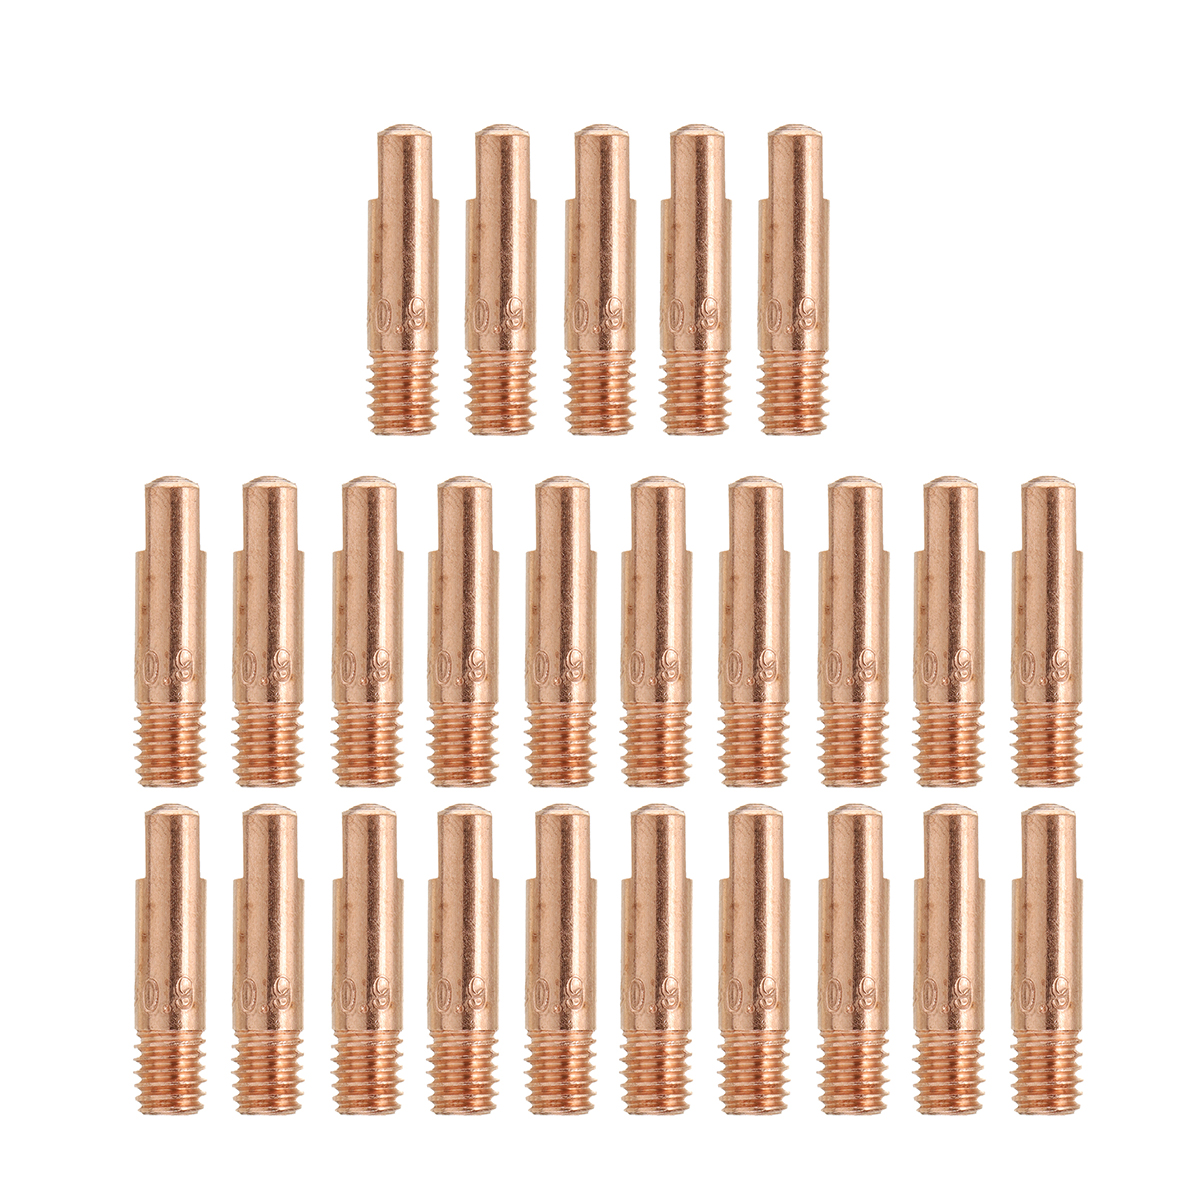 

25Pcs Brass Welding Torch Contact Tip Gas Nozzle For 0.035" Tweco Mini #1 and For Lincoln Magnum 100L MIG Torches